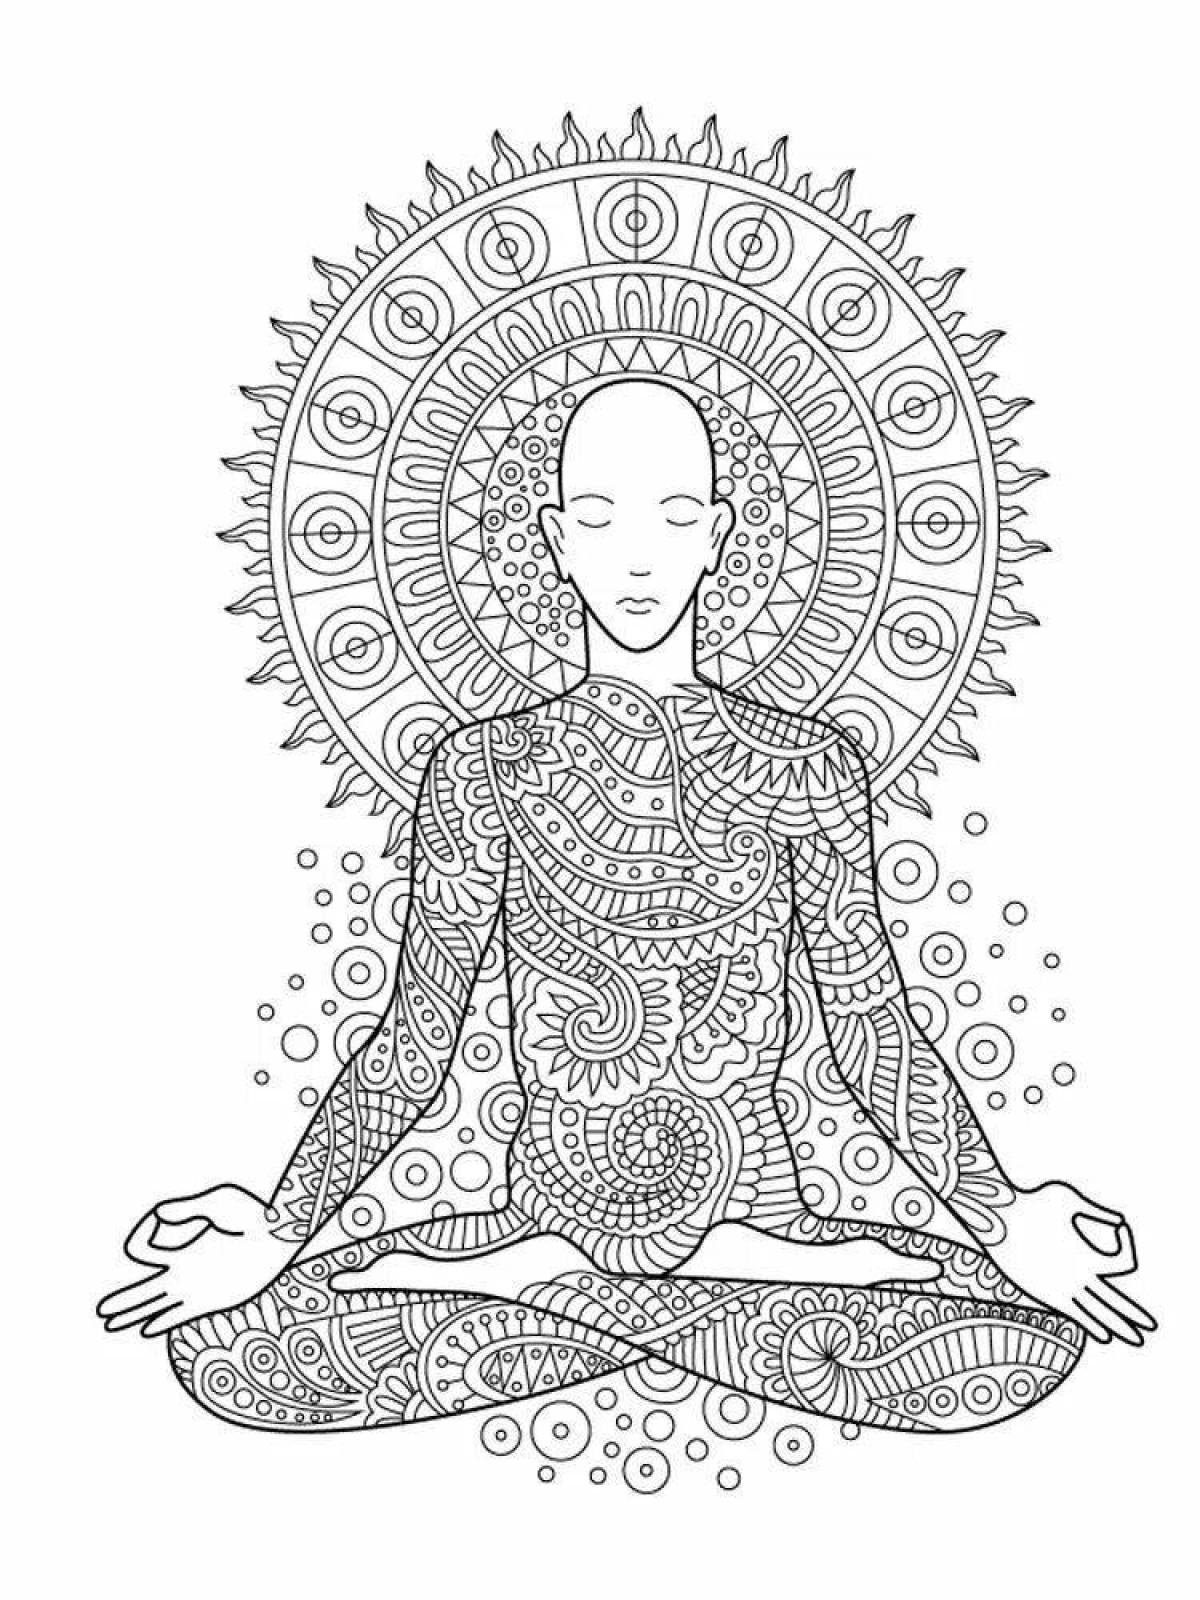 Playful yoga coloring page